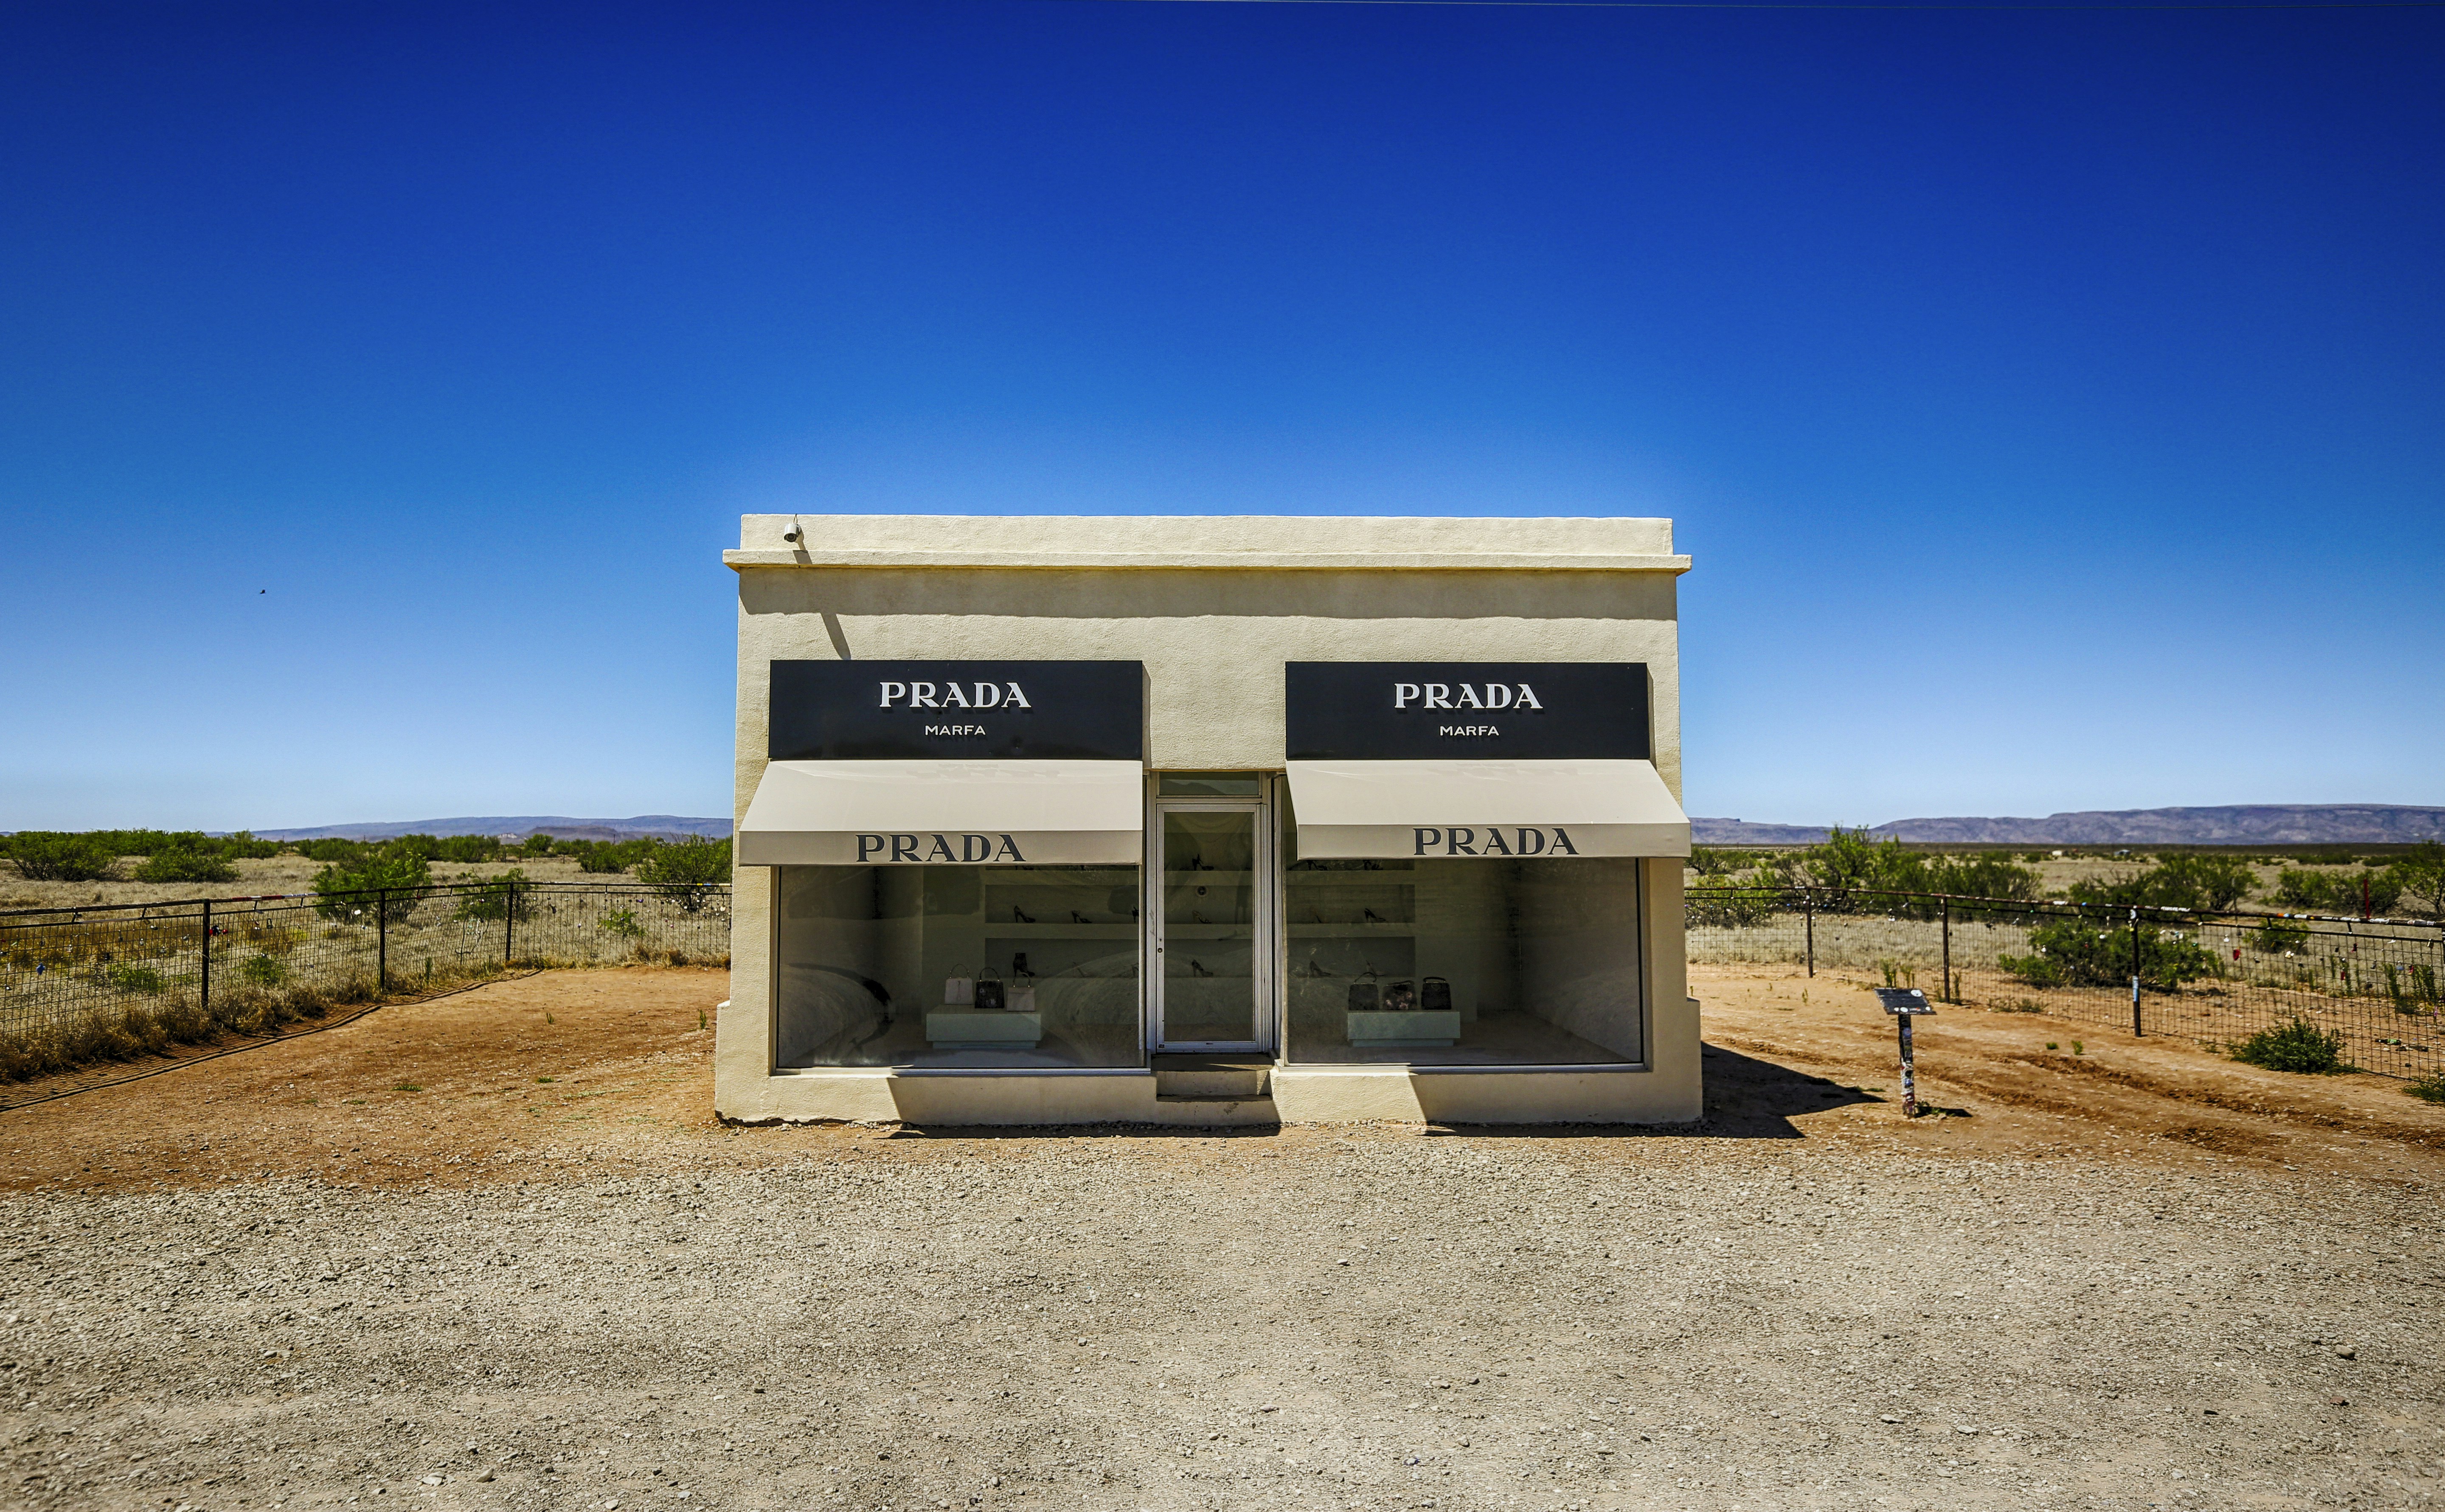 The town of Marfa, Texas has become synonymous with modern, satirical art. All the art isn't in the town itself, as this installation is 28 miles northeast of the town. Out in the middle of nowhere, it still attracts hundreds of tourists every day. A curious road trip find for sure.